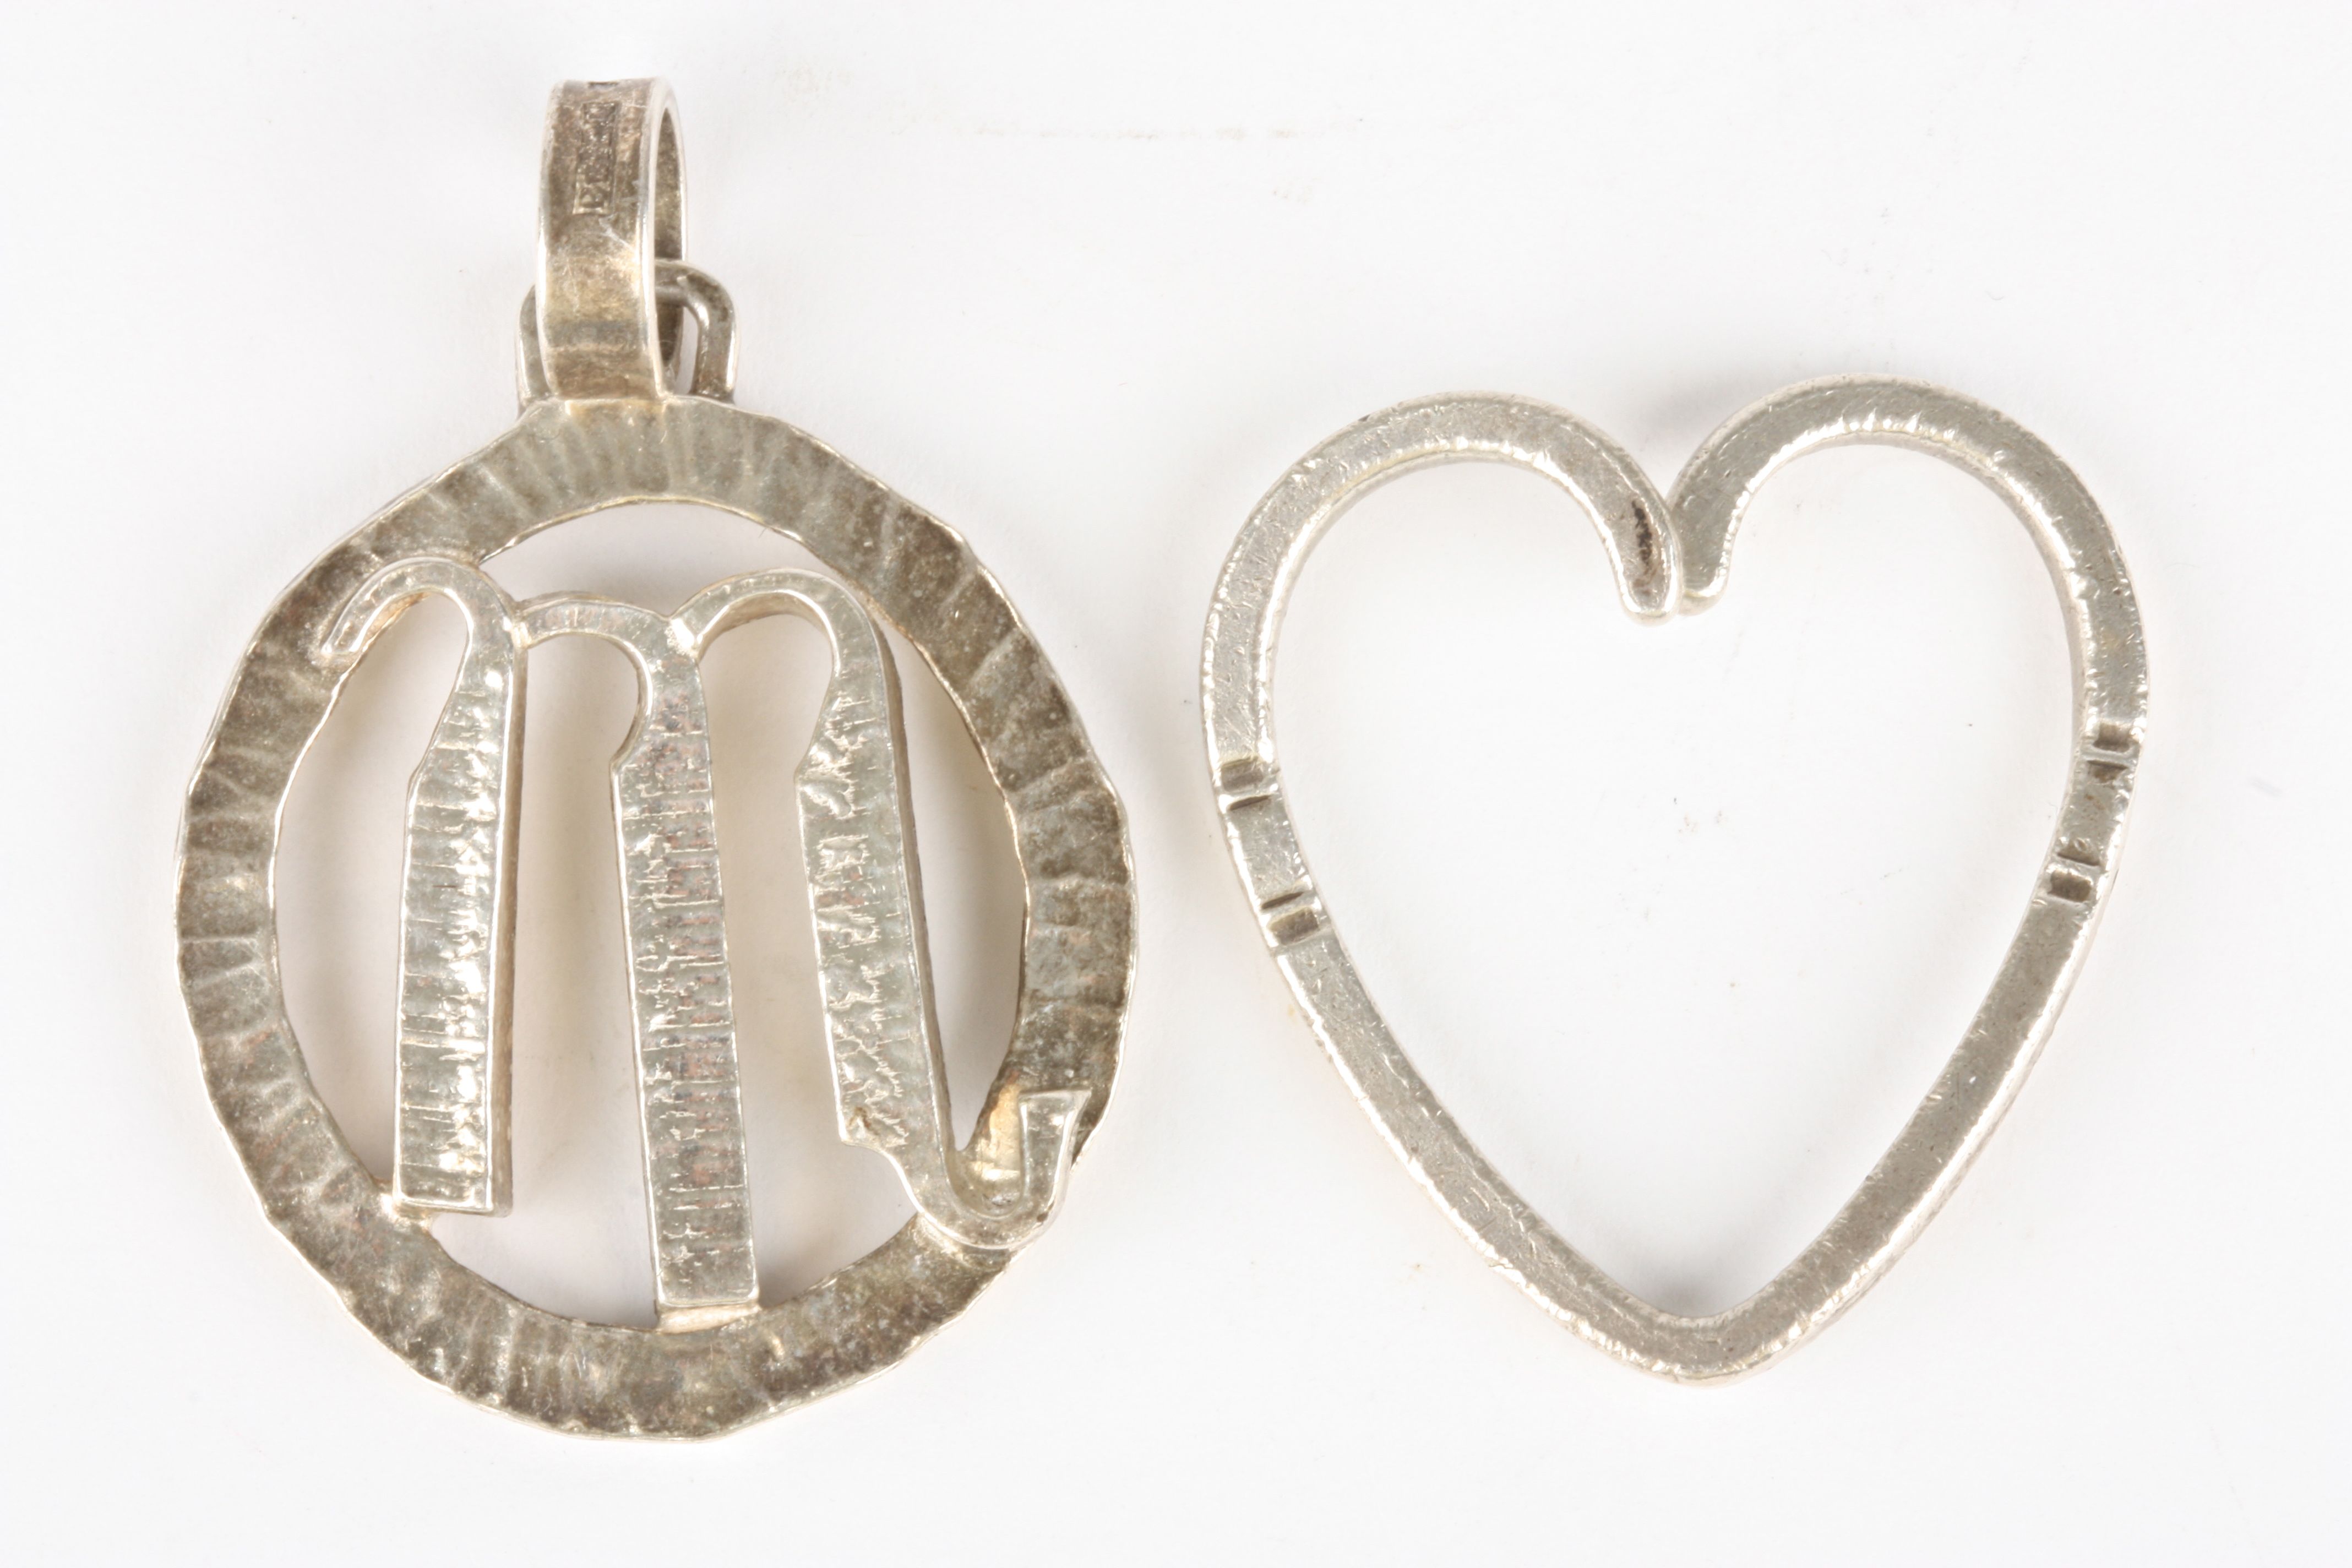 A Georg Jensen silver heart shaped pendant
together with another silver pendant with applied Scorpio